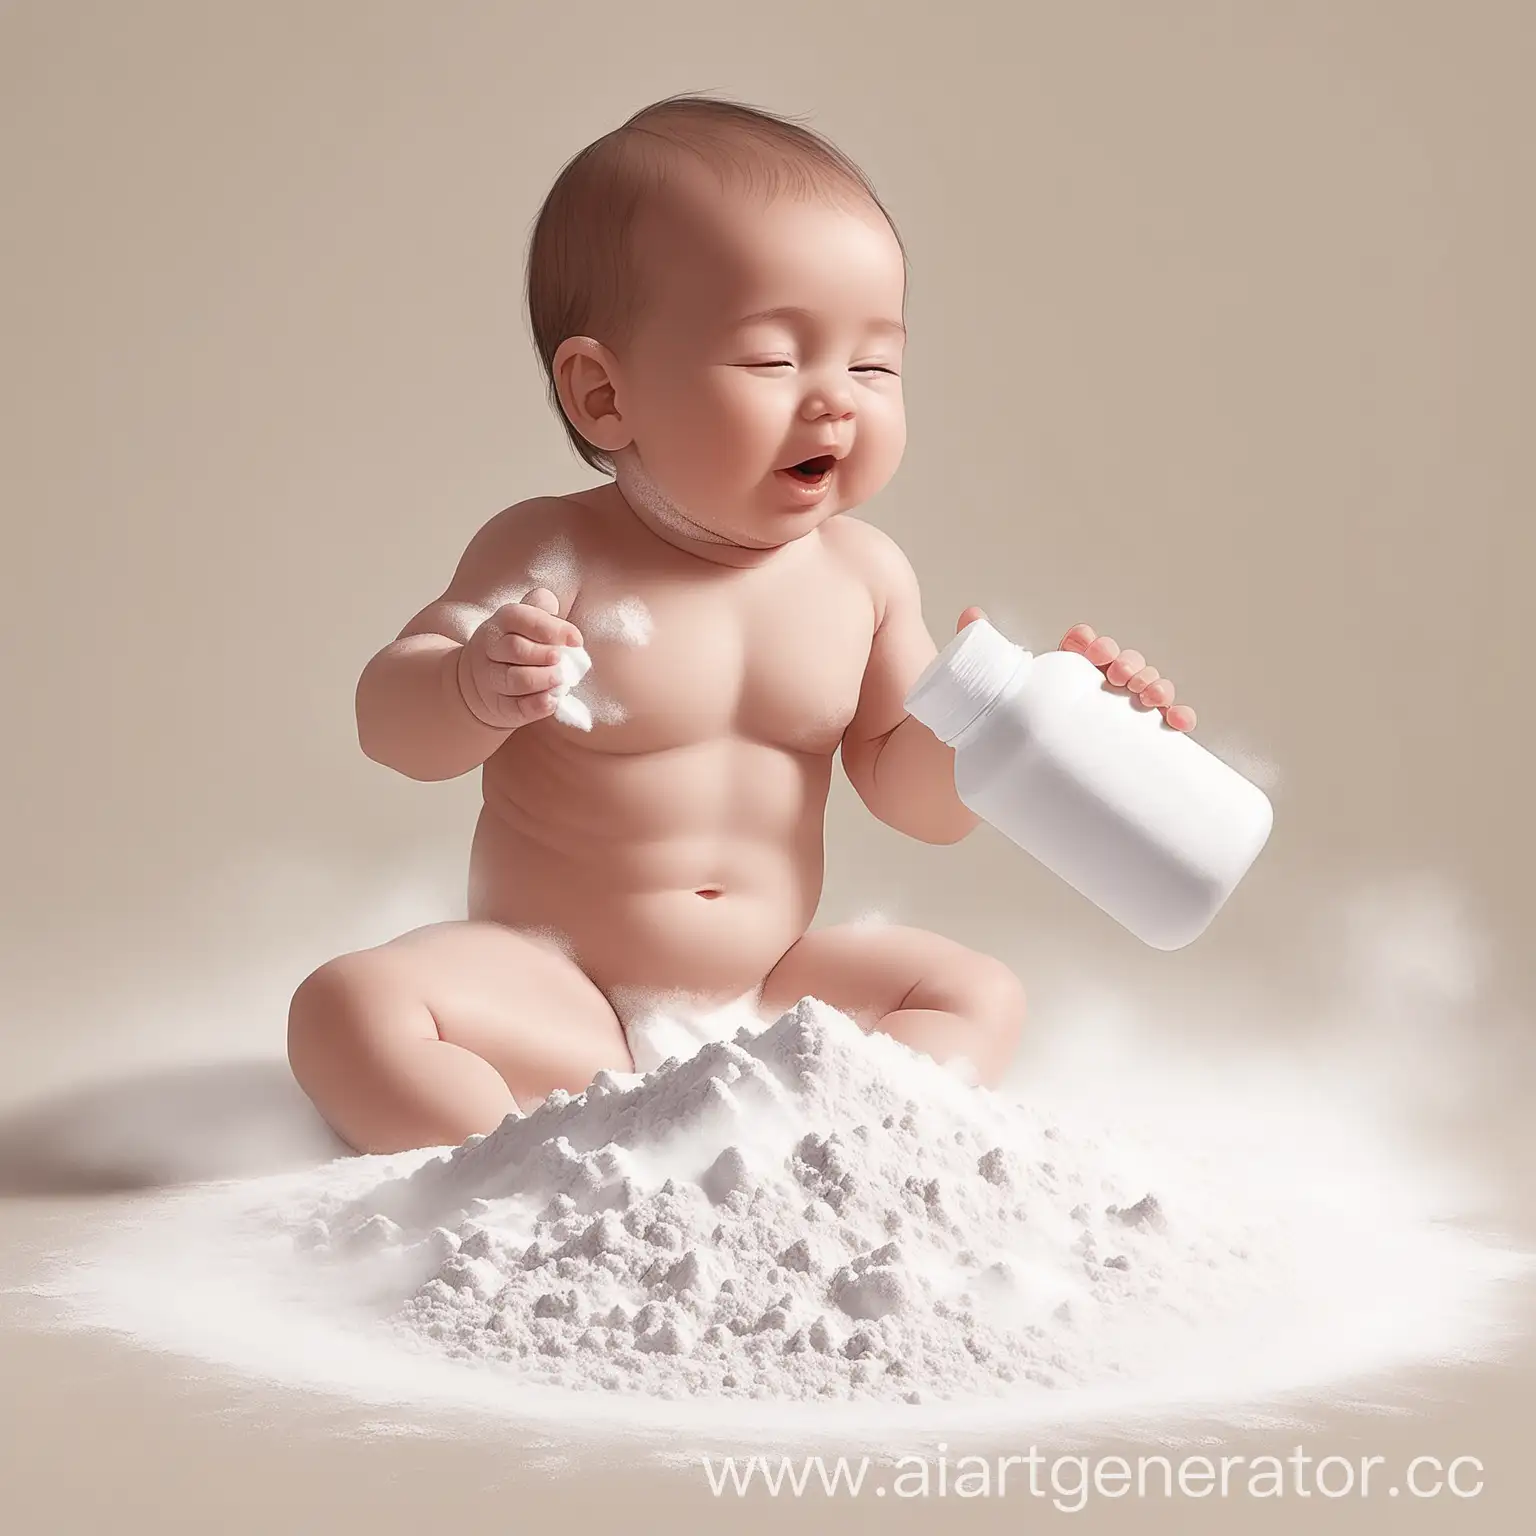 Soft-and-Gentle-Baby-Powder-Spread-on-Delicate-Skin